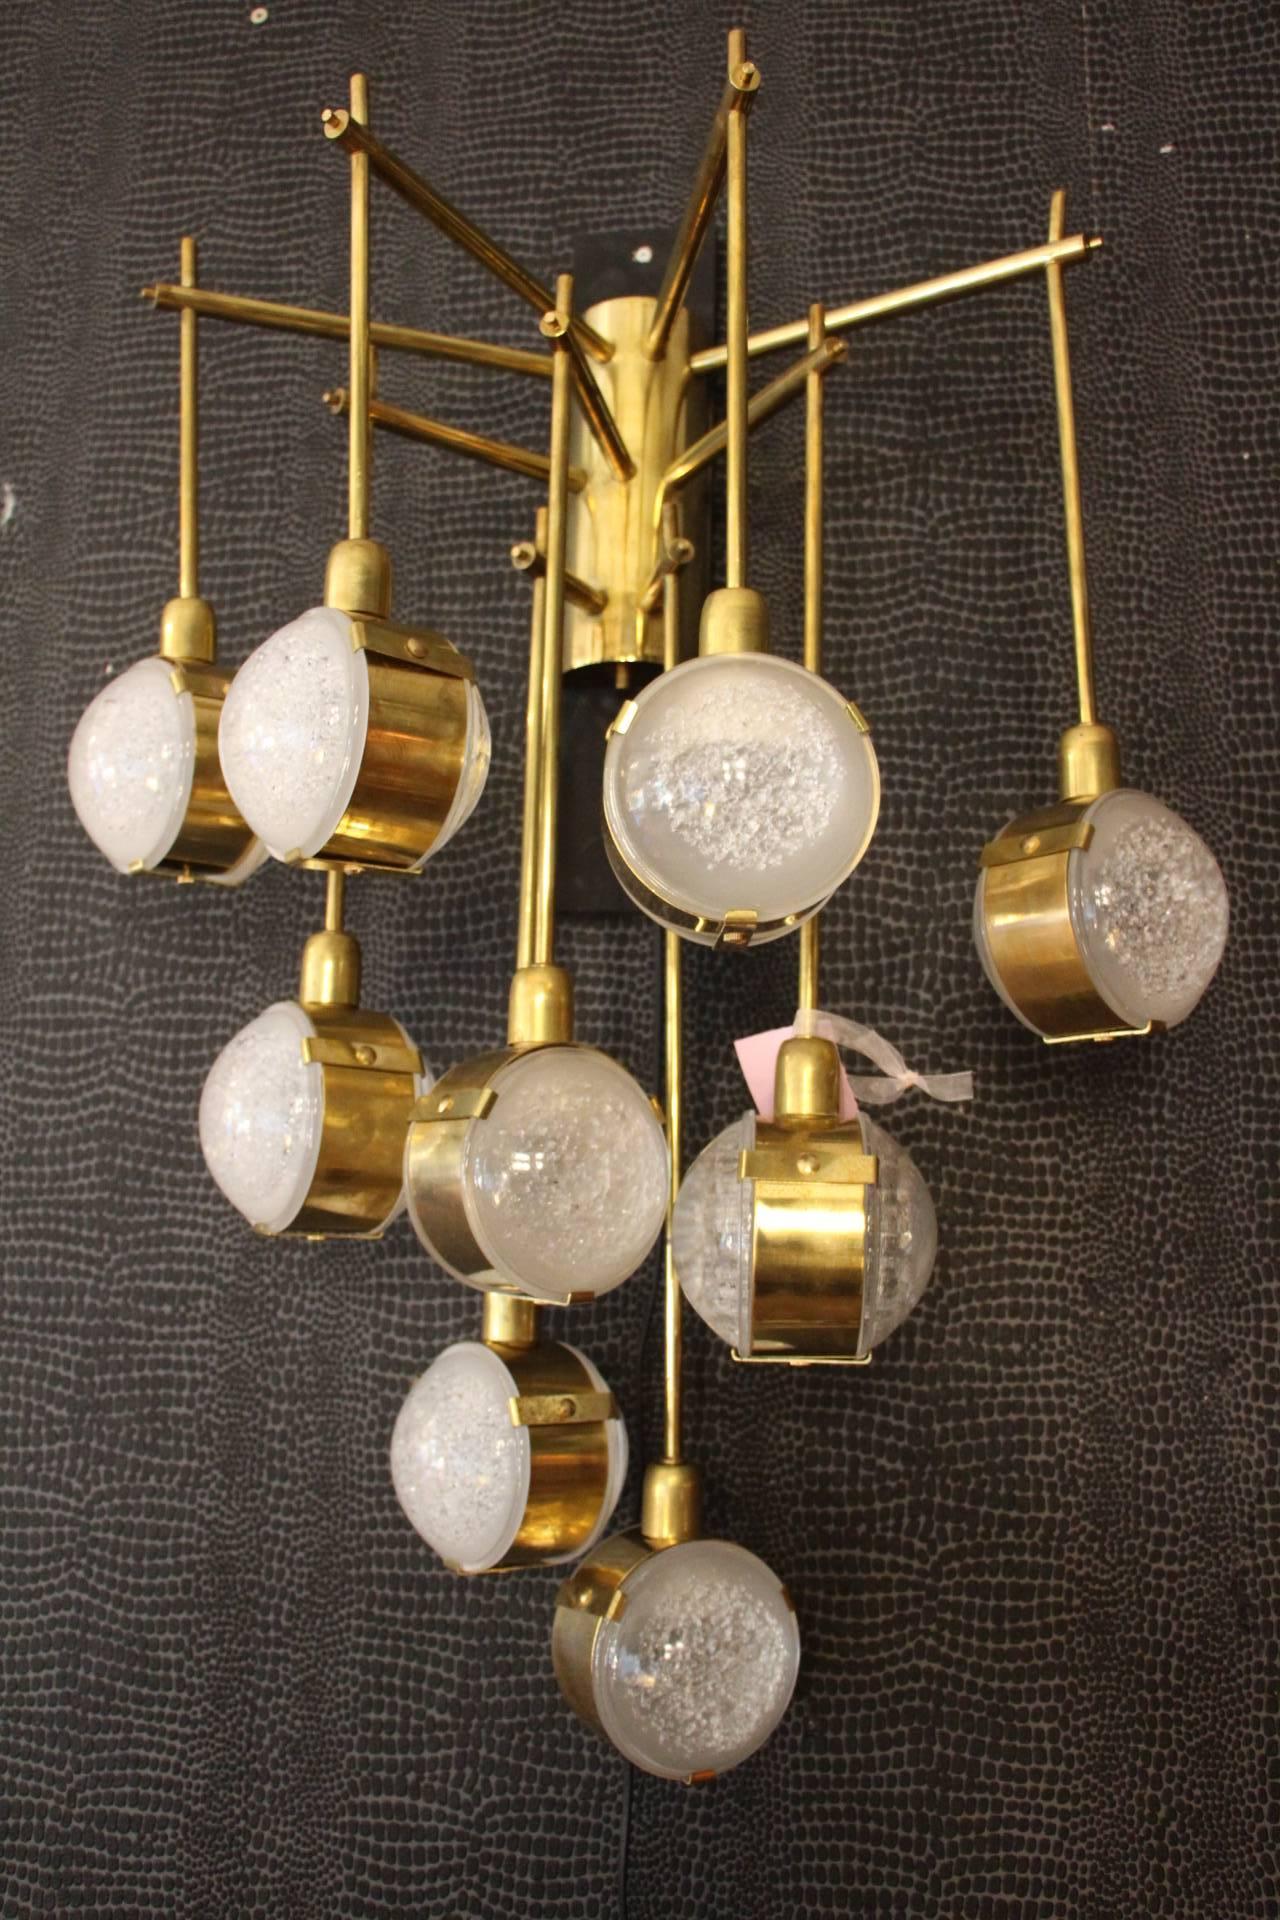 Italian Modern Midcentury Long Pair of Brass and Glass Sconces, Tall Wall Lights 4